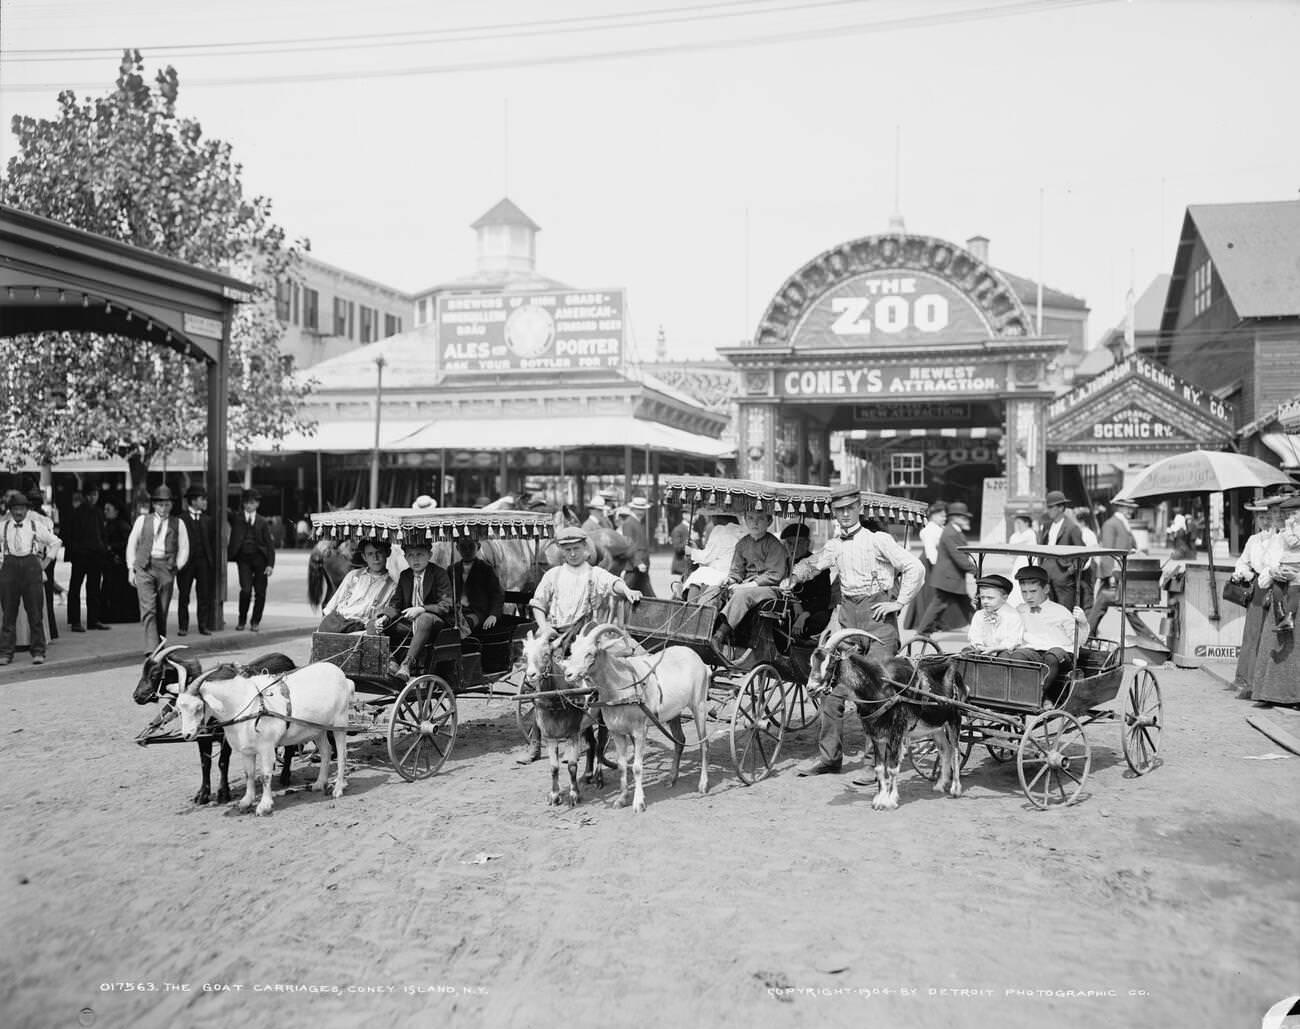 Goat Carriages At Coney Island, Brooklyn, 1904